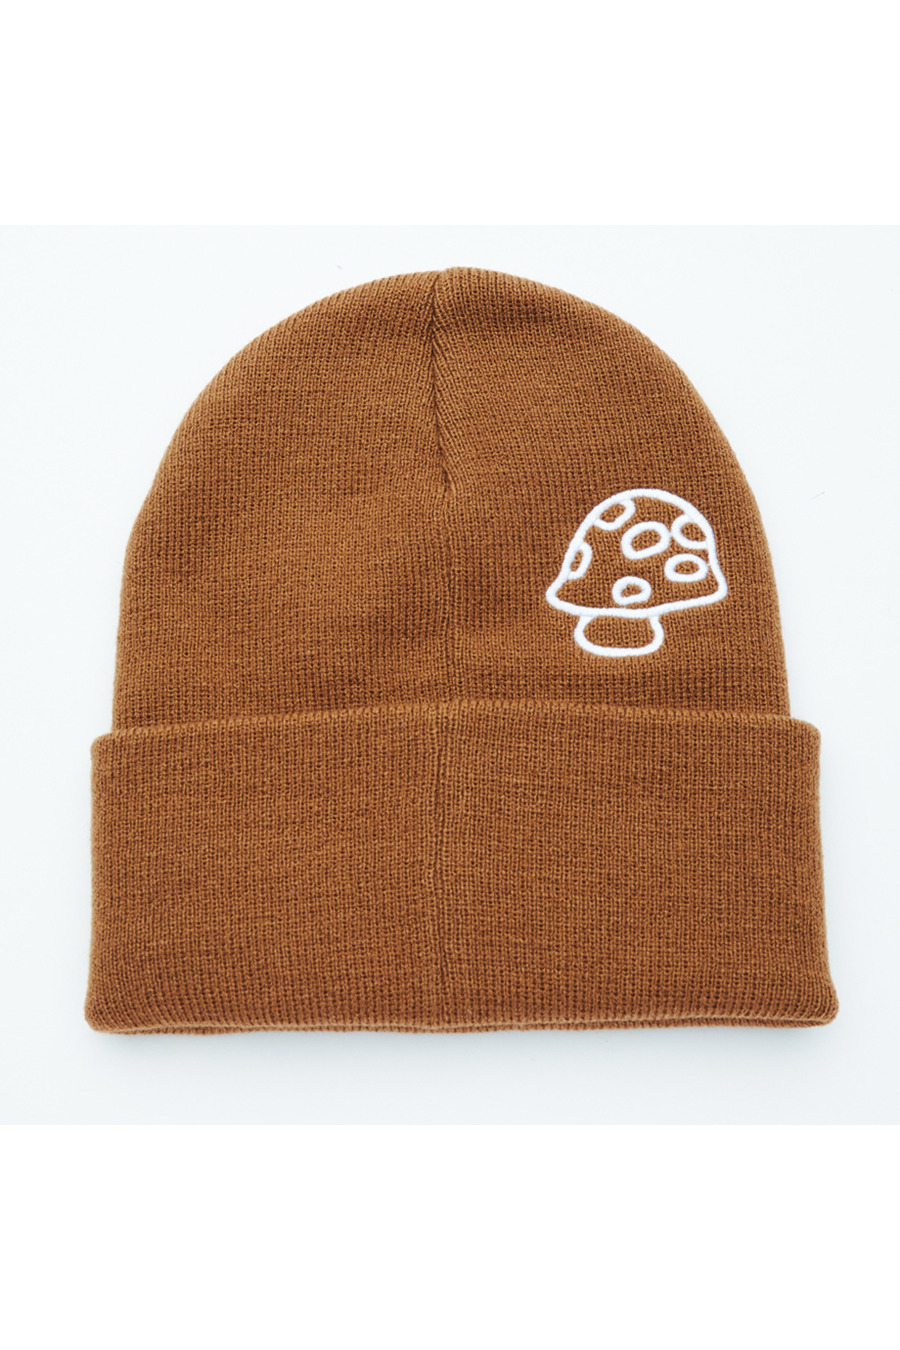 Flash Beanie | Duck Brown - Main Image Number 2 of 2